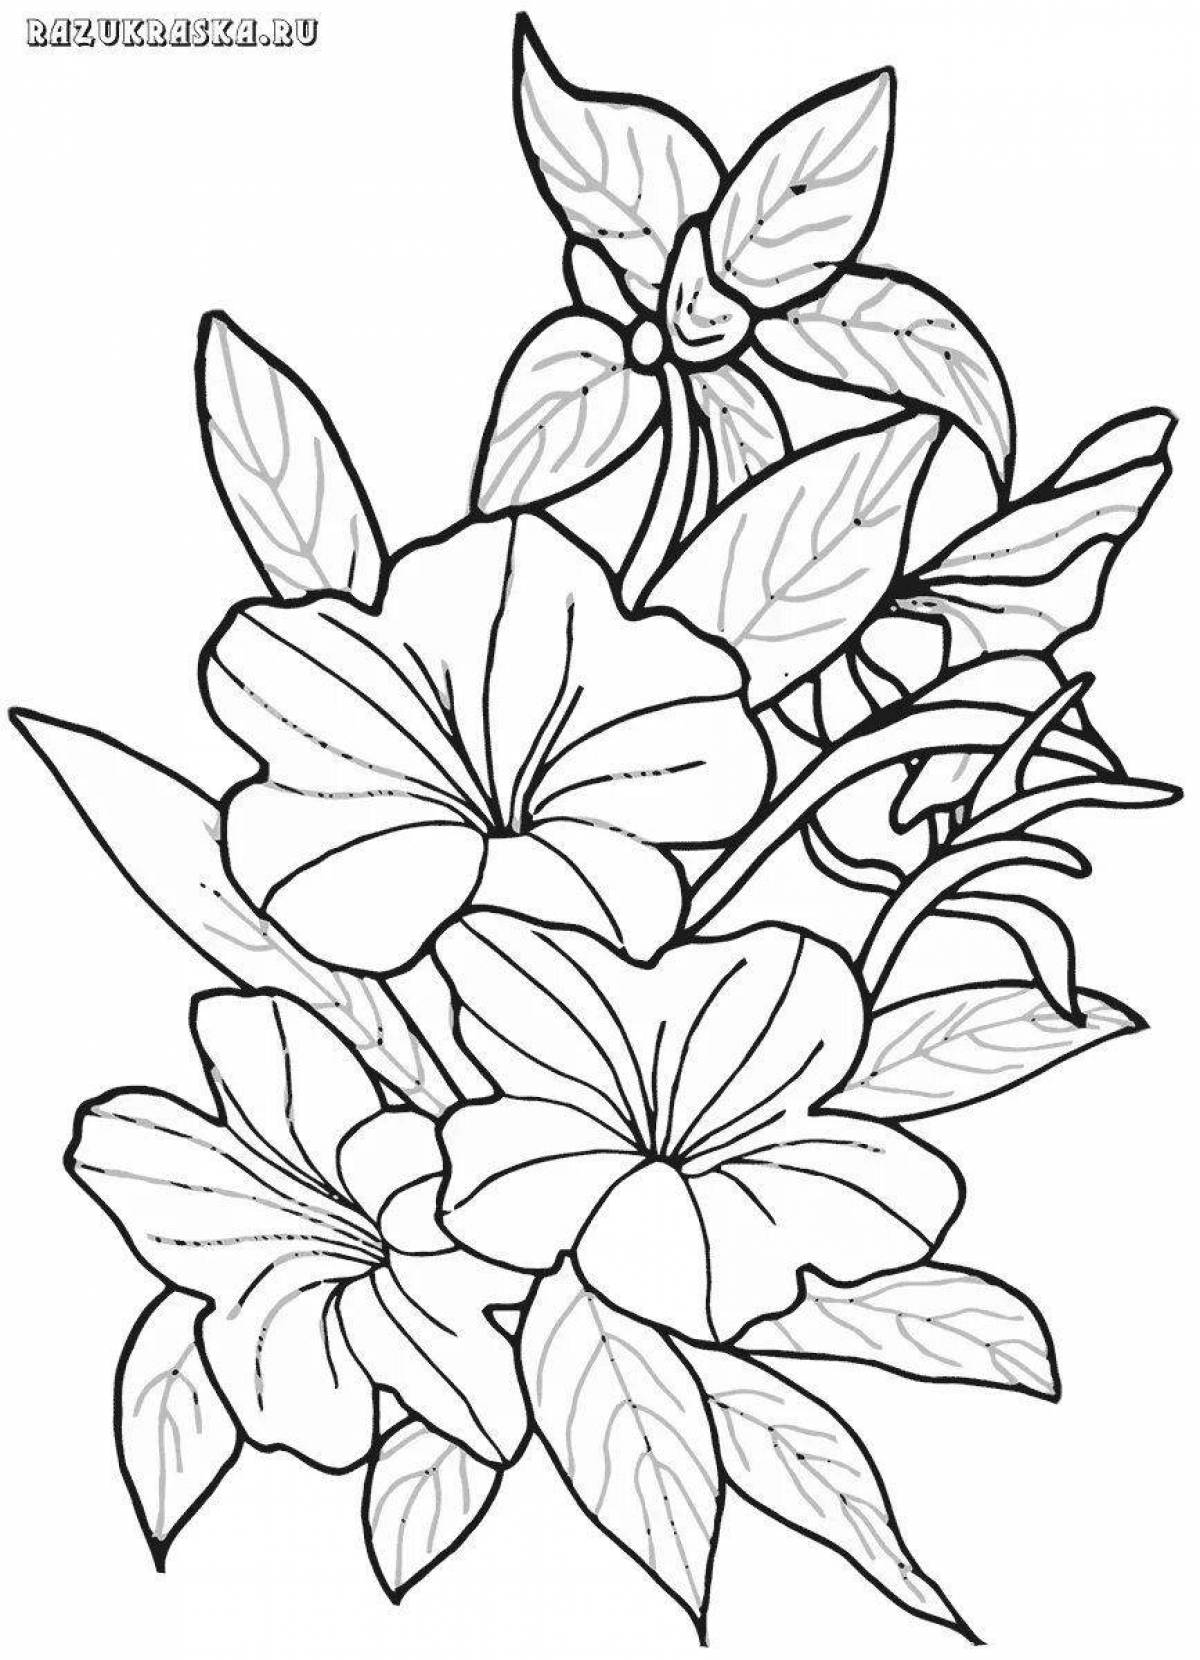 Magic flowers coloring pages